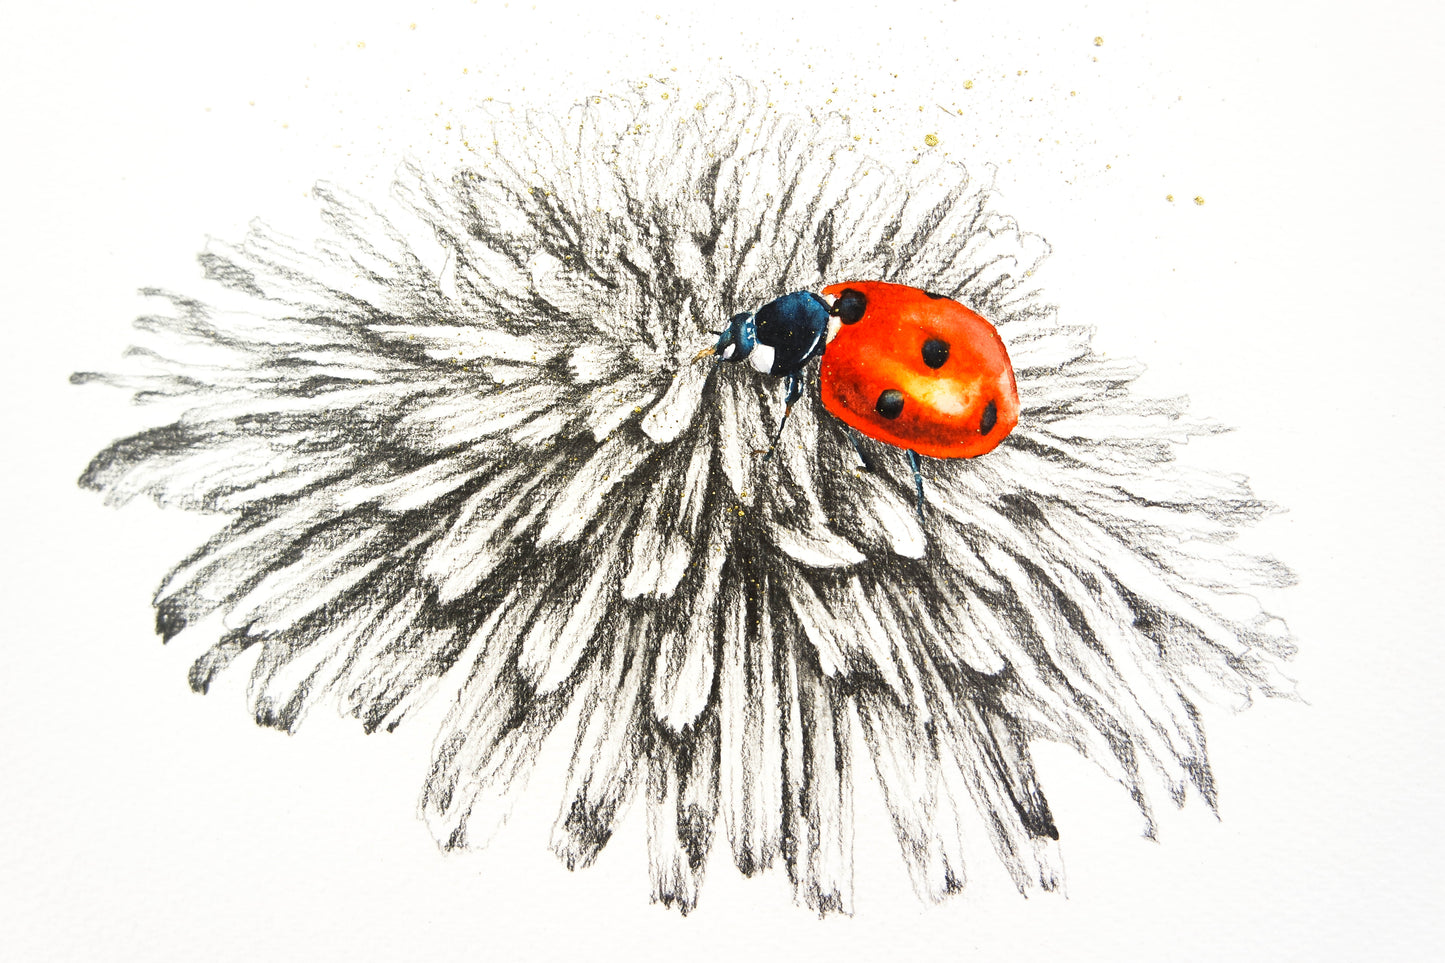 Bees, ladybirds  and sketches